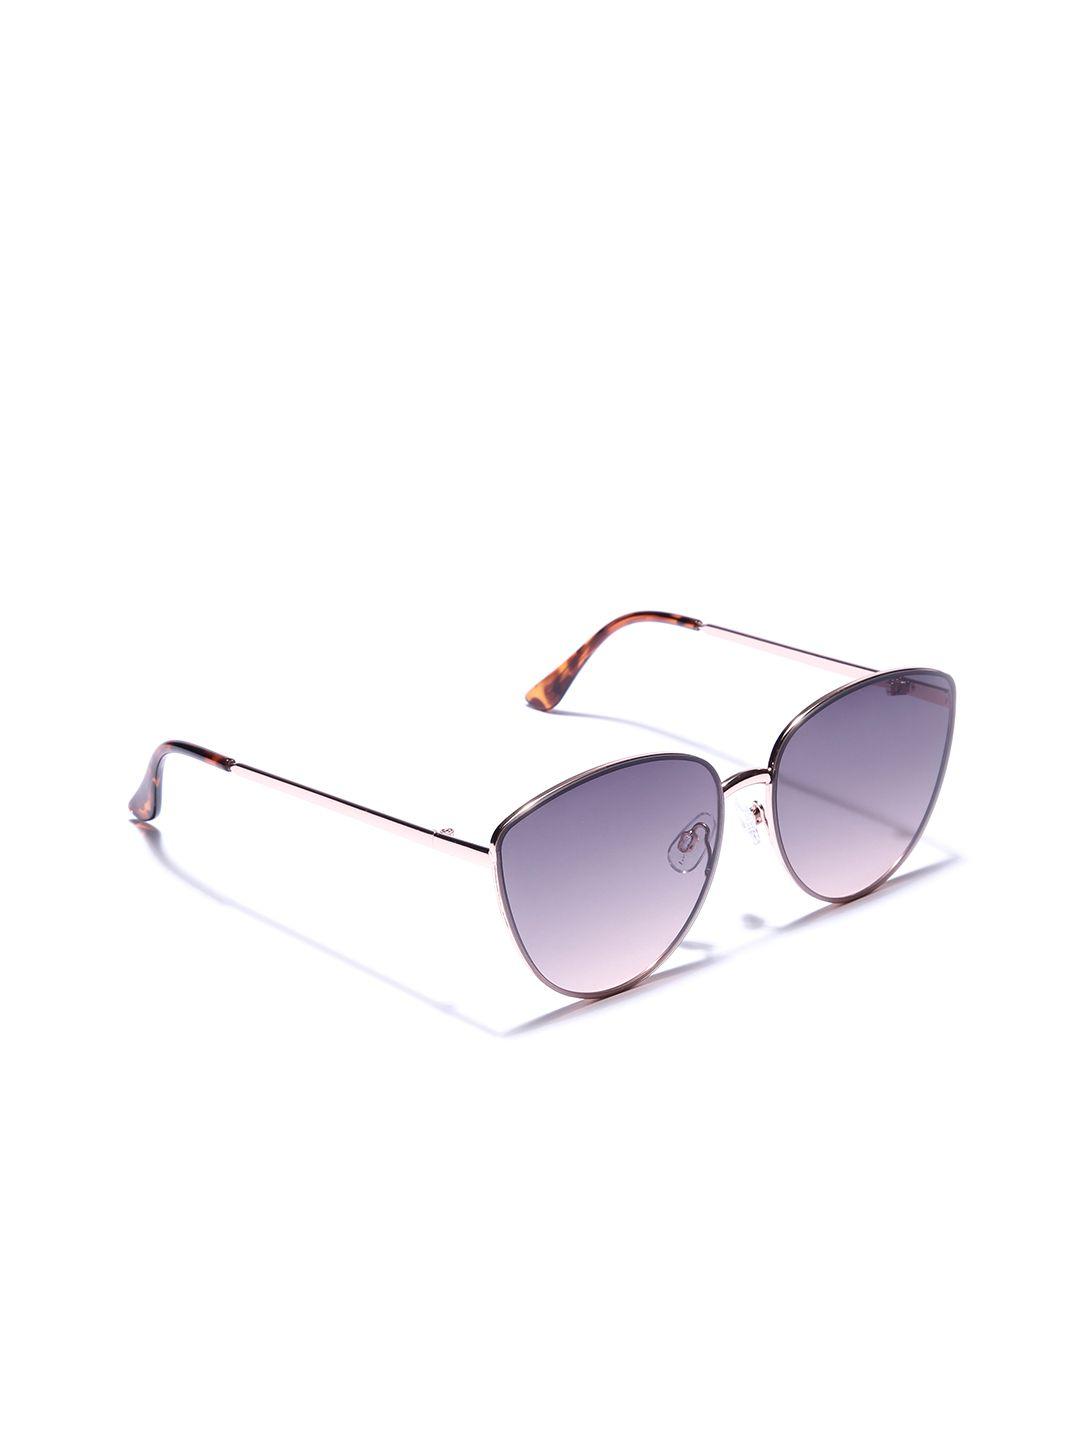 carlton-london-women-cateye-sunglasses-with-uv-protected-lens--clsw176